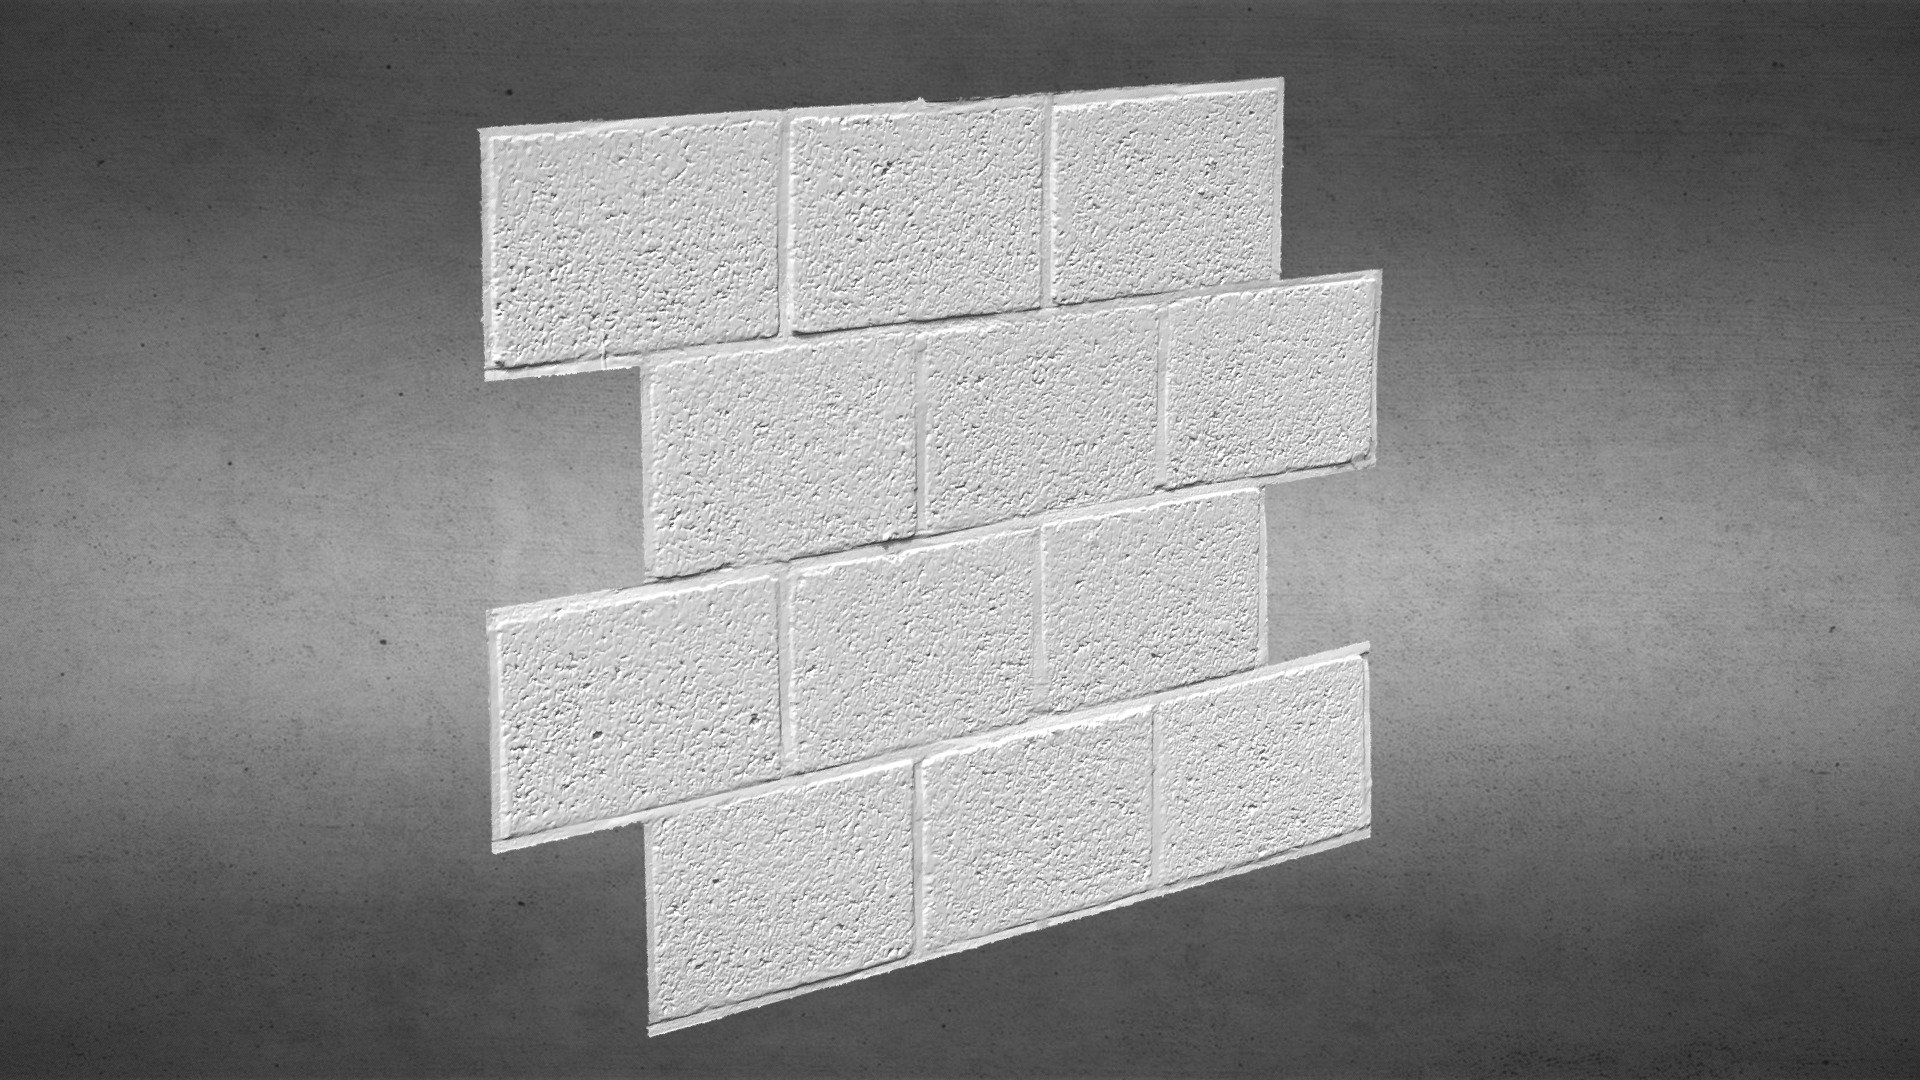 High detail 3D scan of a concrete brick wall.
Can be used as reference texture.

Water tight, except for the surrounding edge

Used technology:
* GOM Atos III triple scanner with a 320MV - 3D scan - Concrete Brick Wall Texture - Buy Royalty Free 3D model by TetraVision 3d model